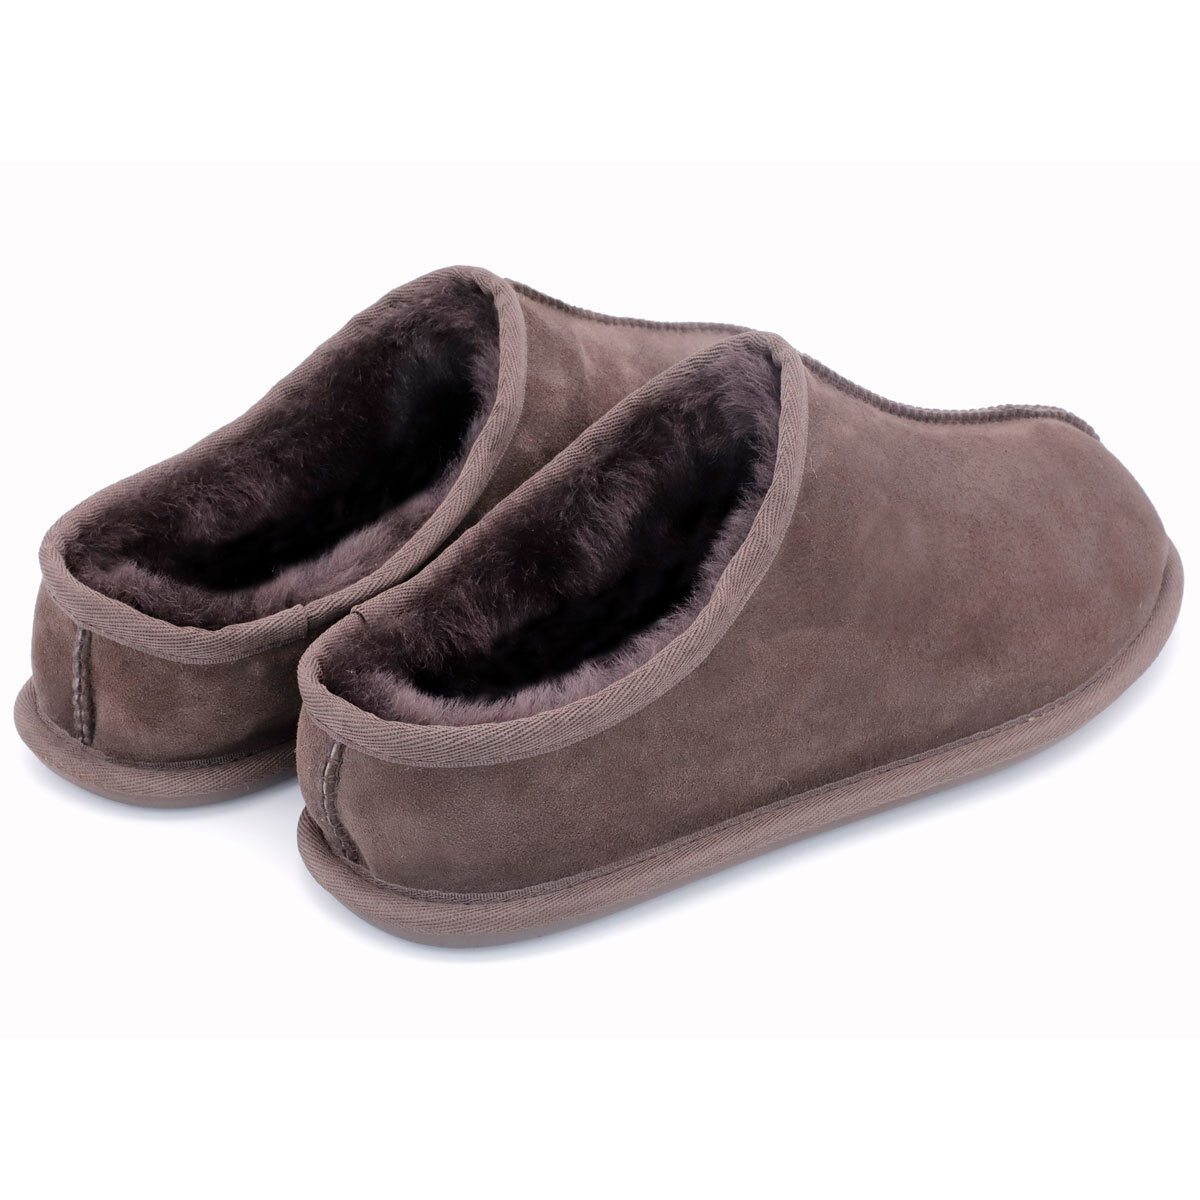 Kirkland Signature Men's Clog Shearling Slippers in Chocolate, 6 Sizes